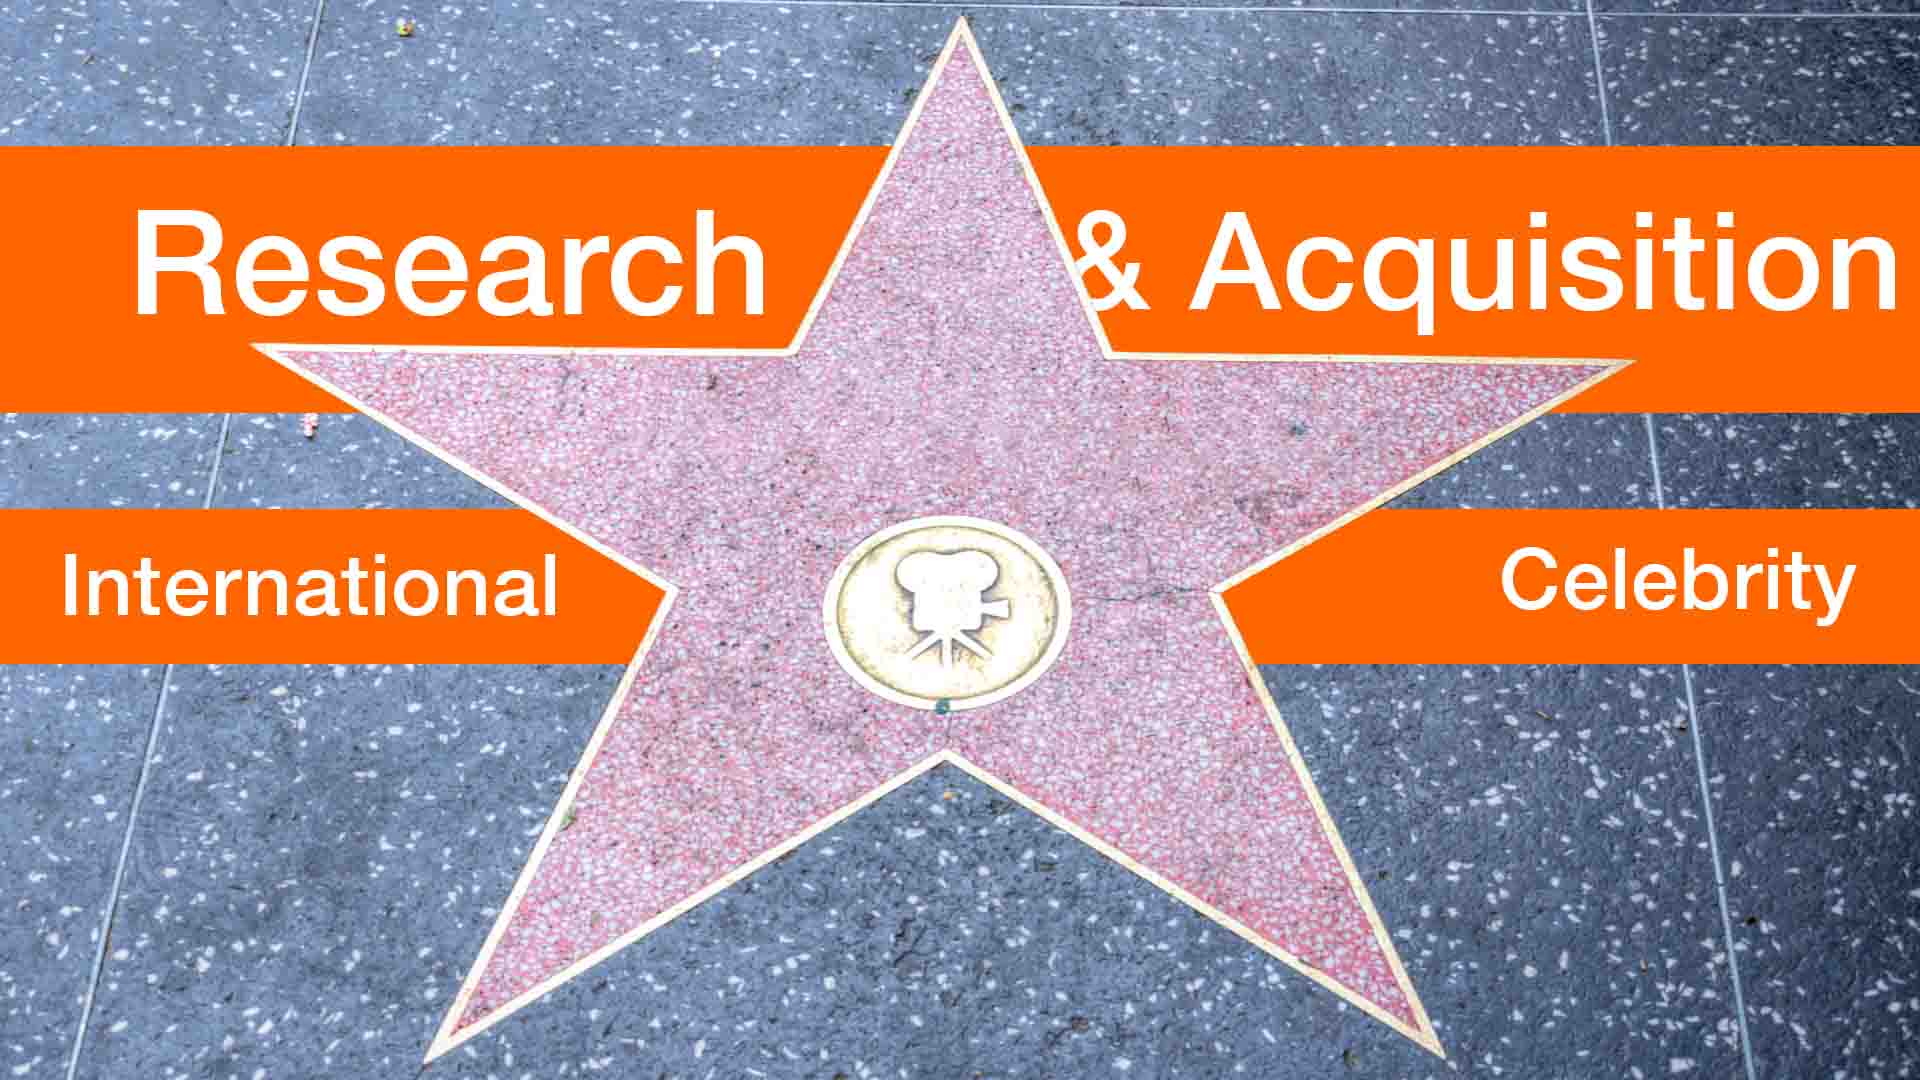 RESEARCH & Acquisition International Celebrity